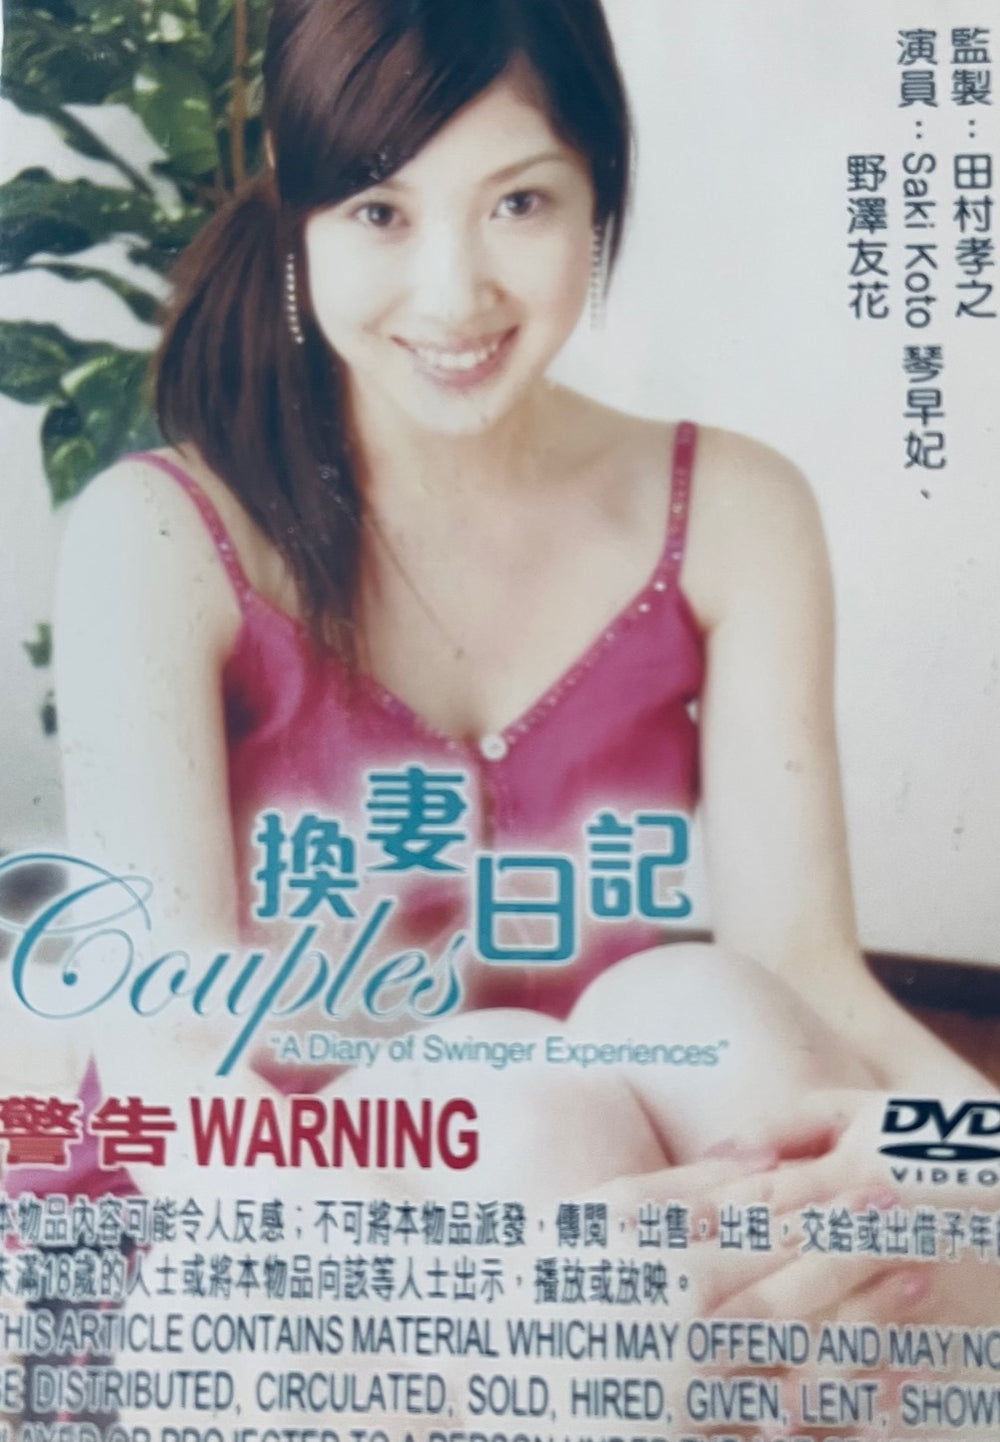 COUPLES A DIARY OF SWINGER EXPERIENCES DVD ENGLISH SUBTITLES (REGION F MoviemusicHK pic